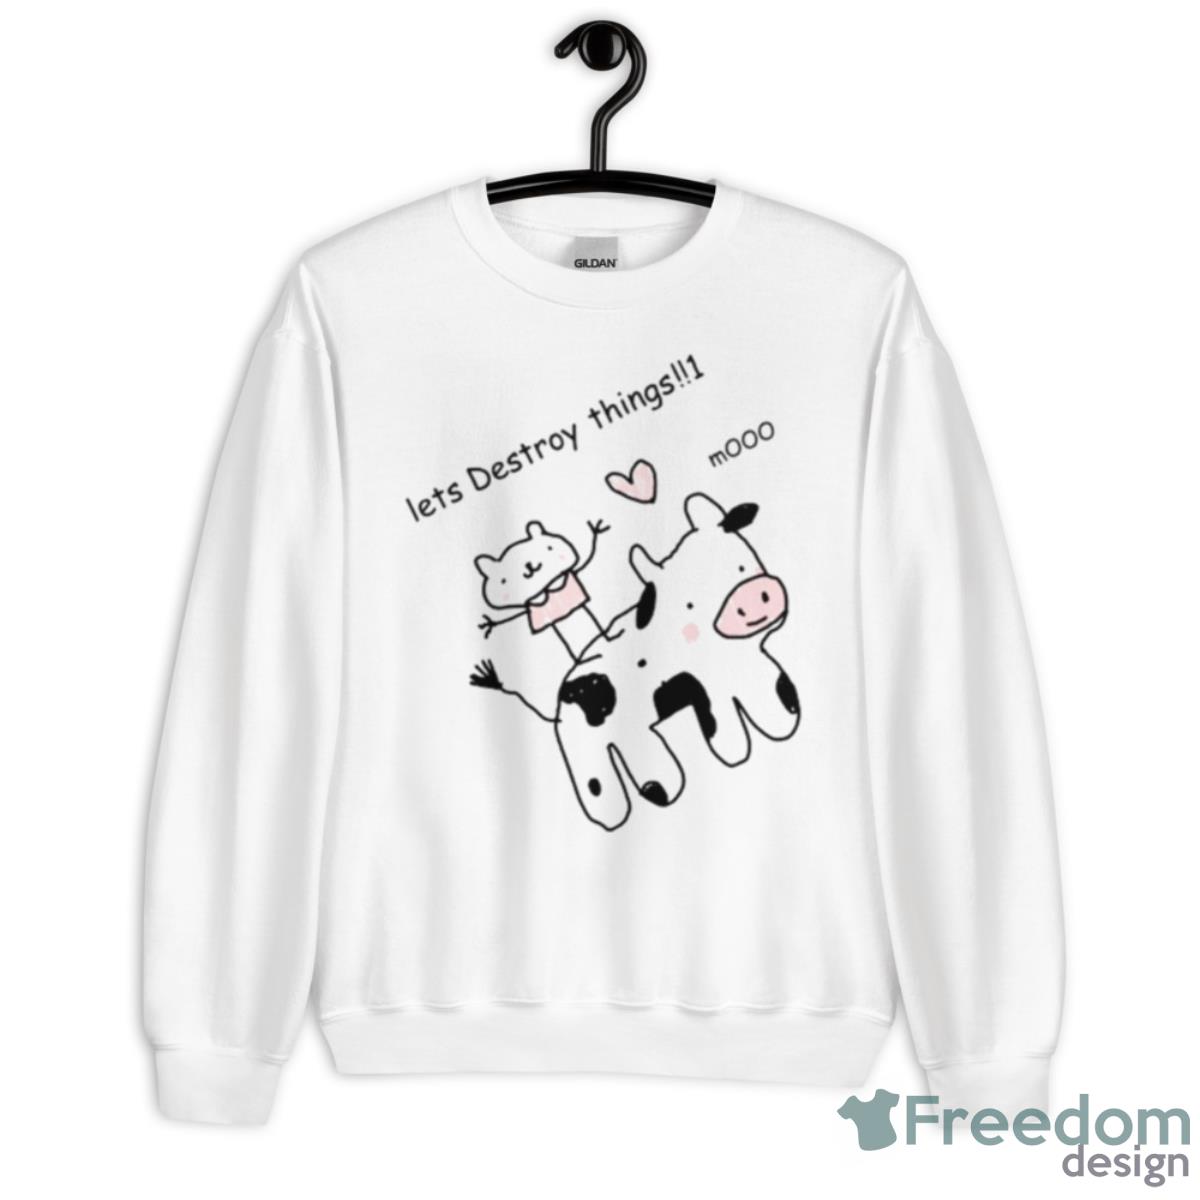 Let’s Destroy Things Mooo Shirt